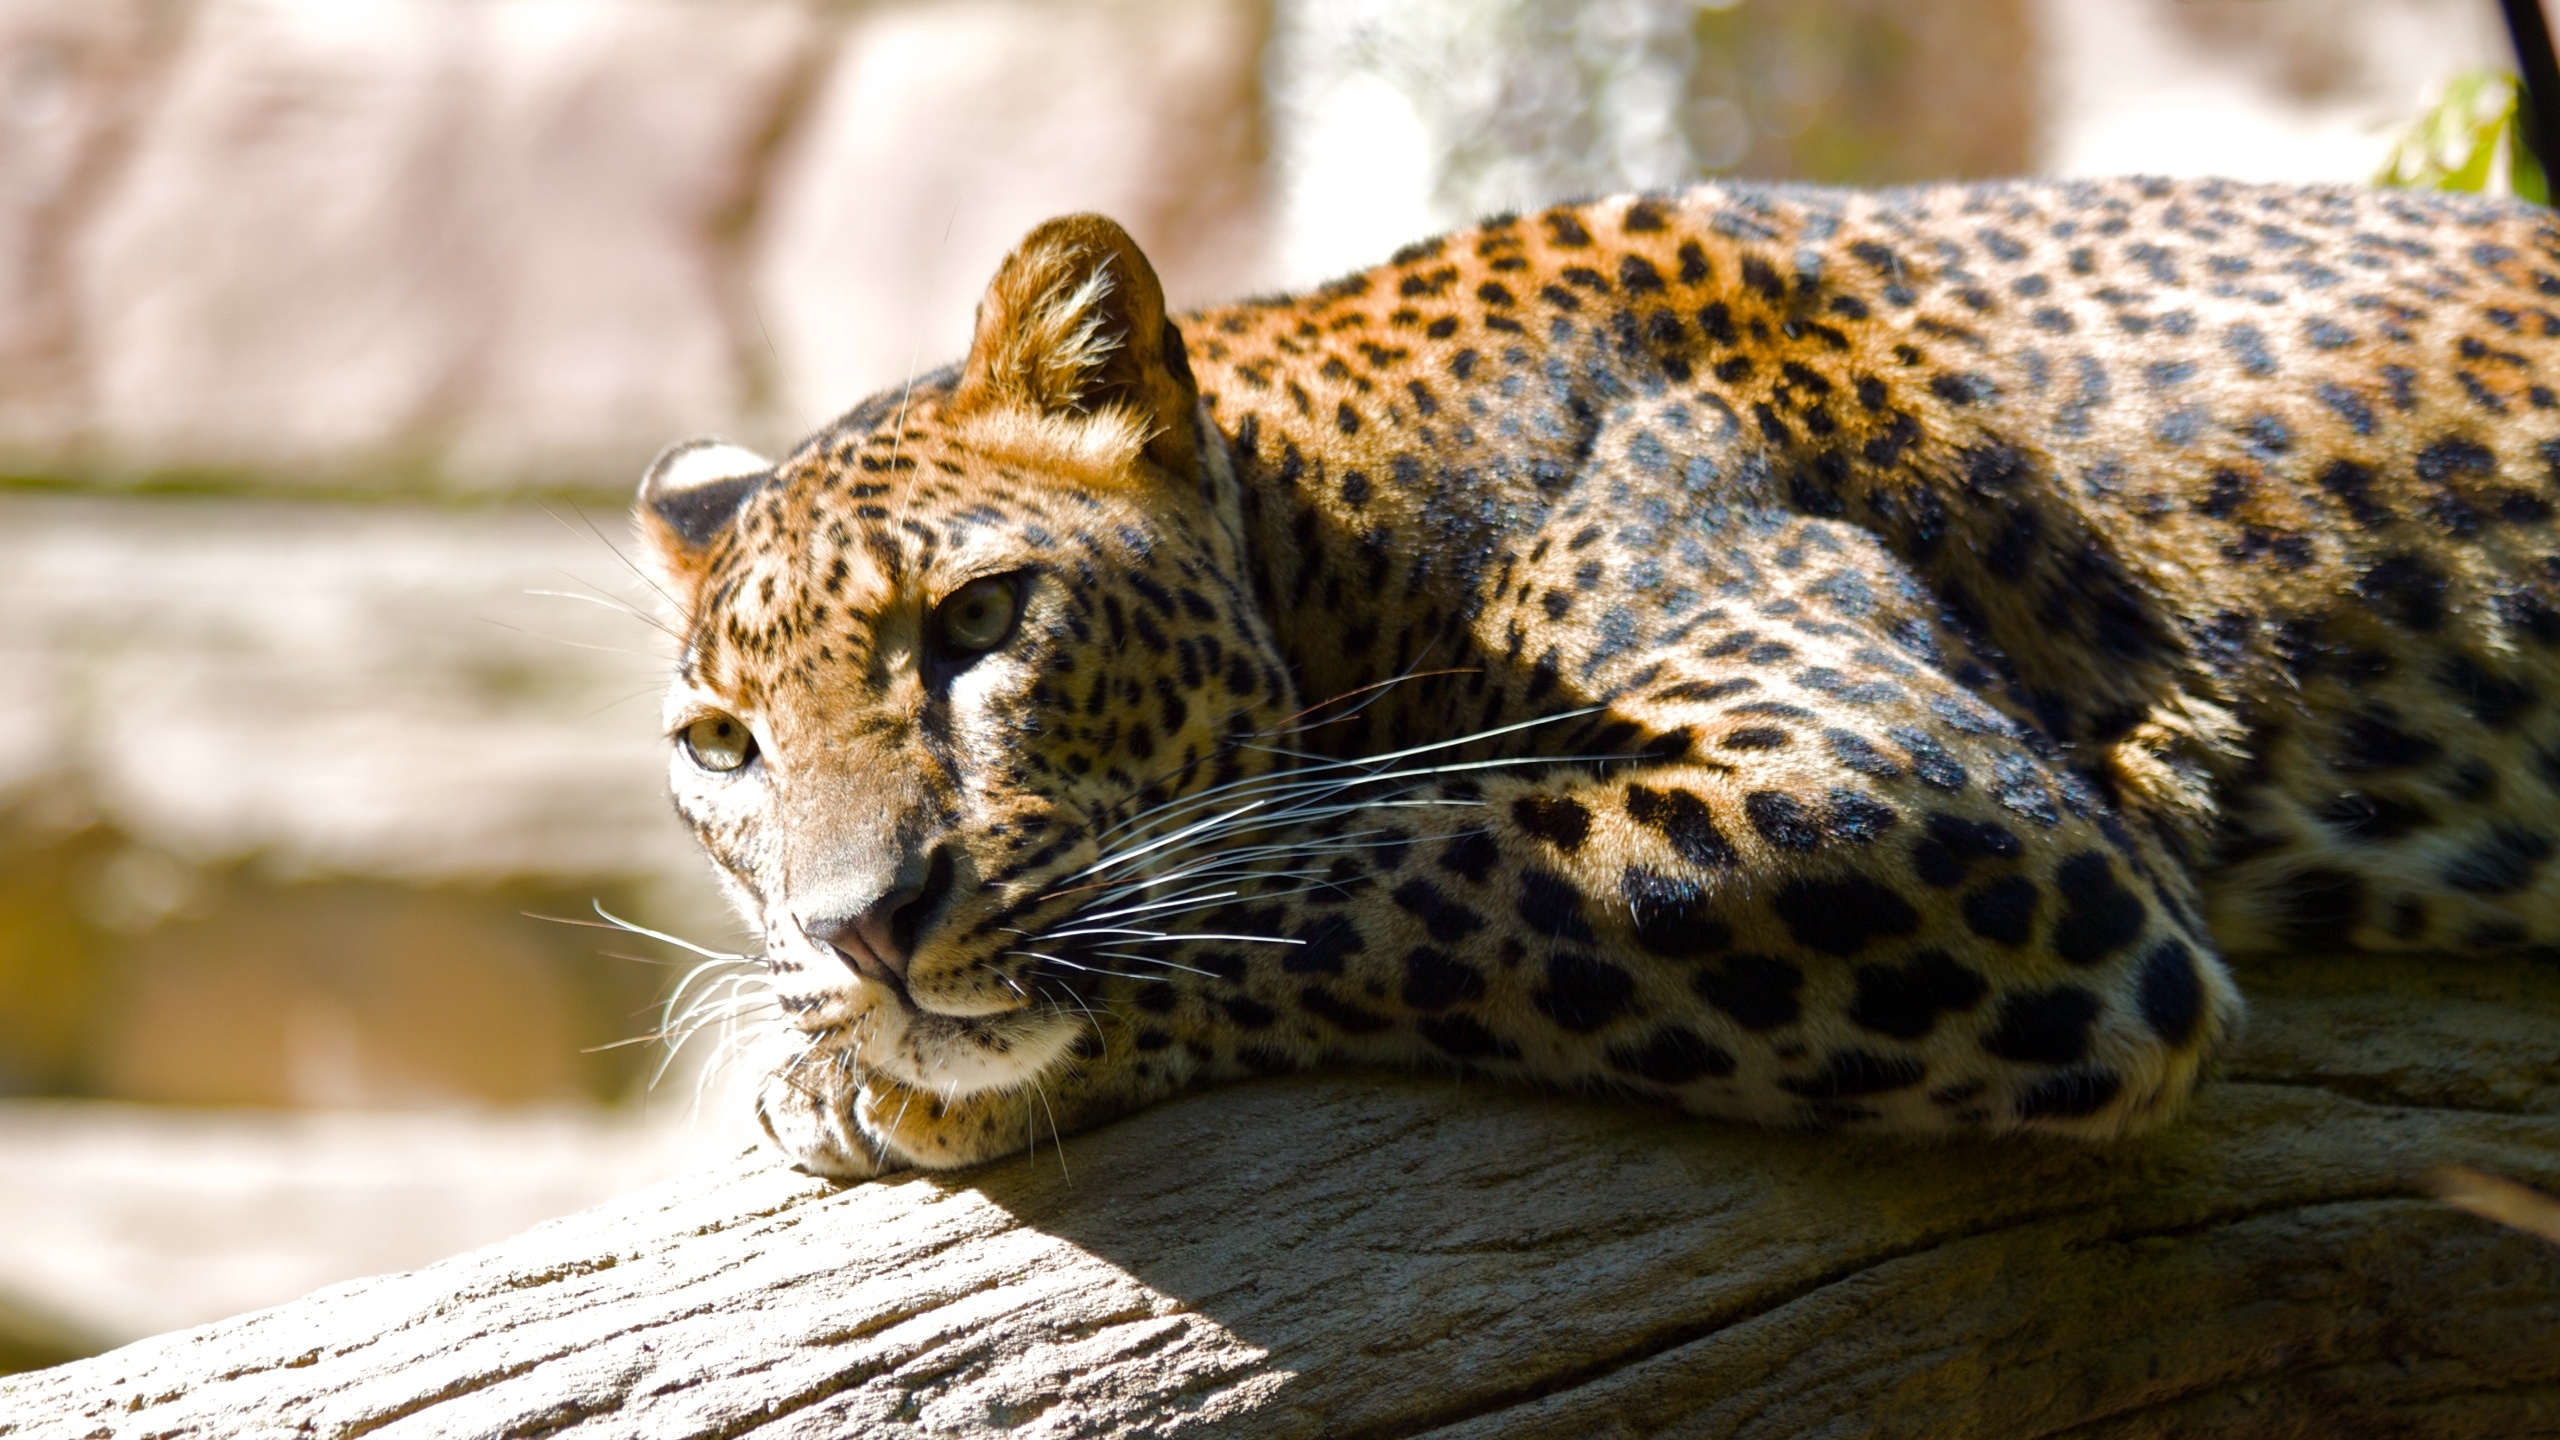 Lazing Leopard for 2560x1440 HDTV resolution